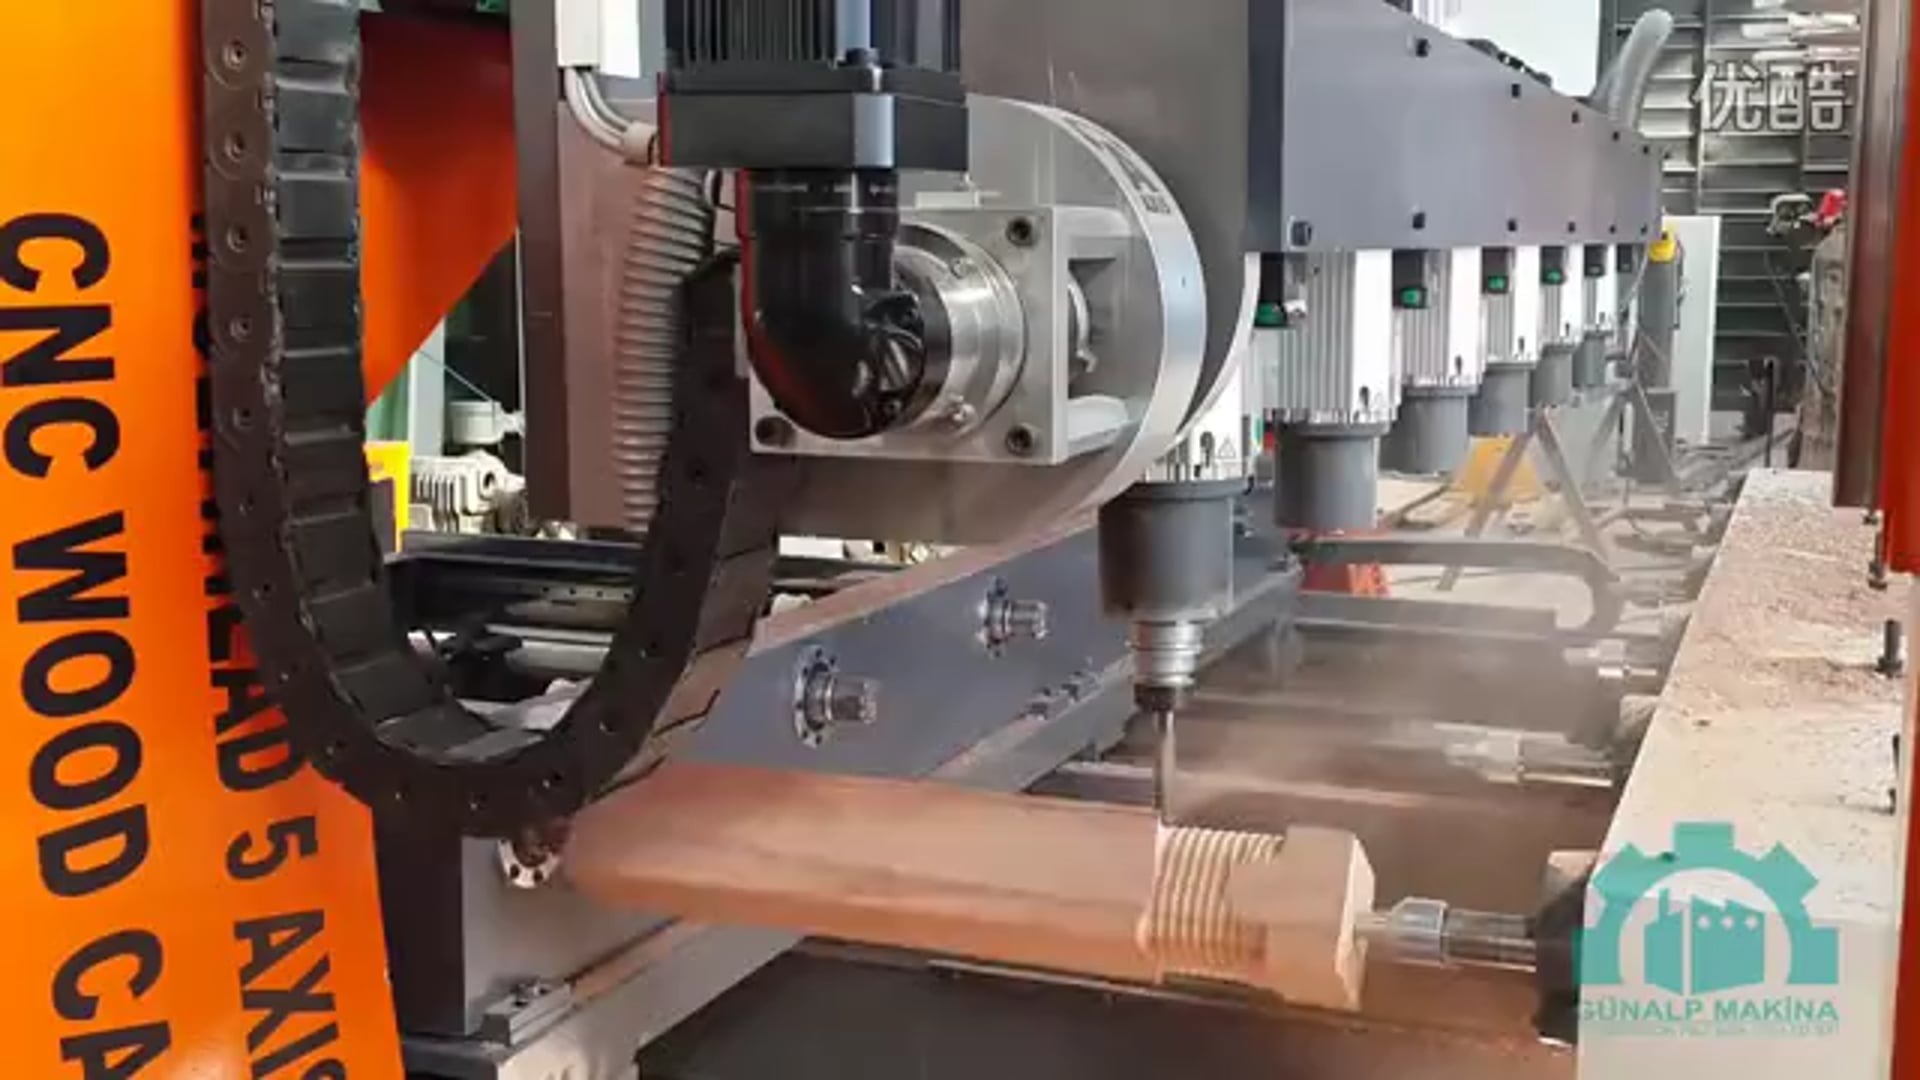 A CNC Router Waving its 5 Axis Simultaneously on a Wood